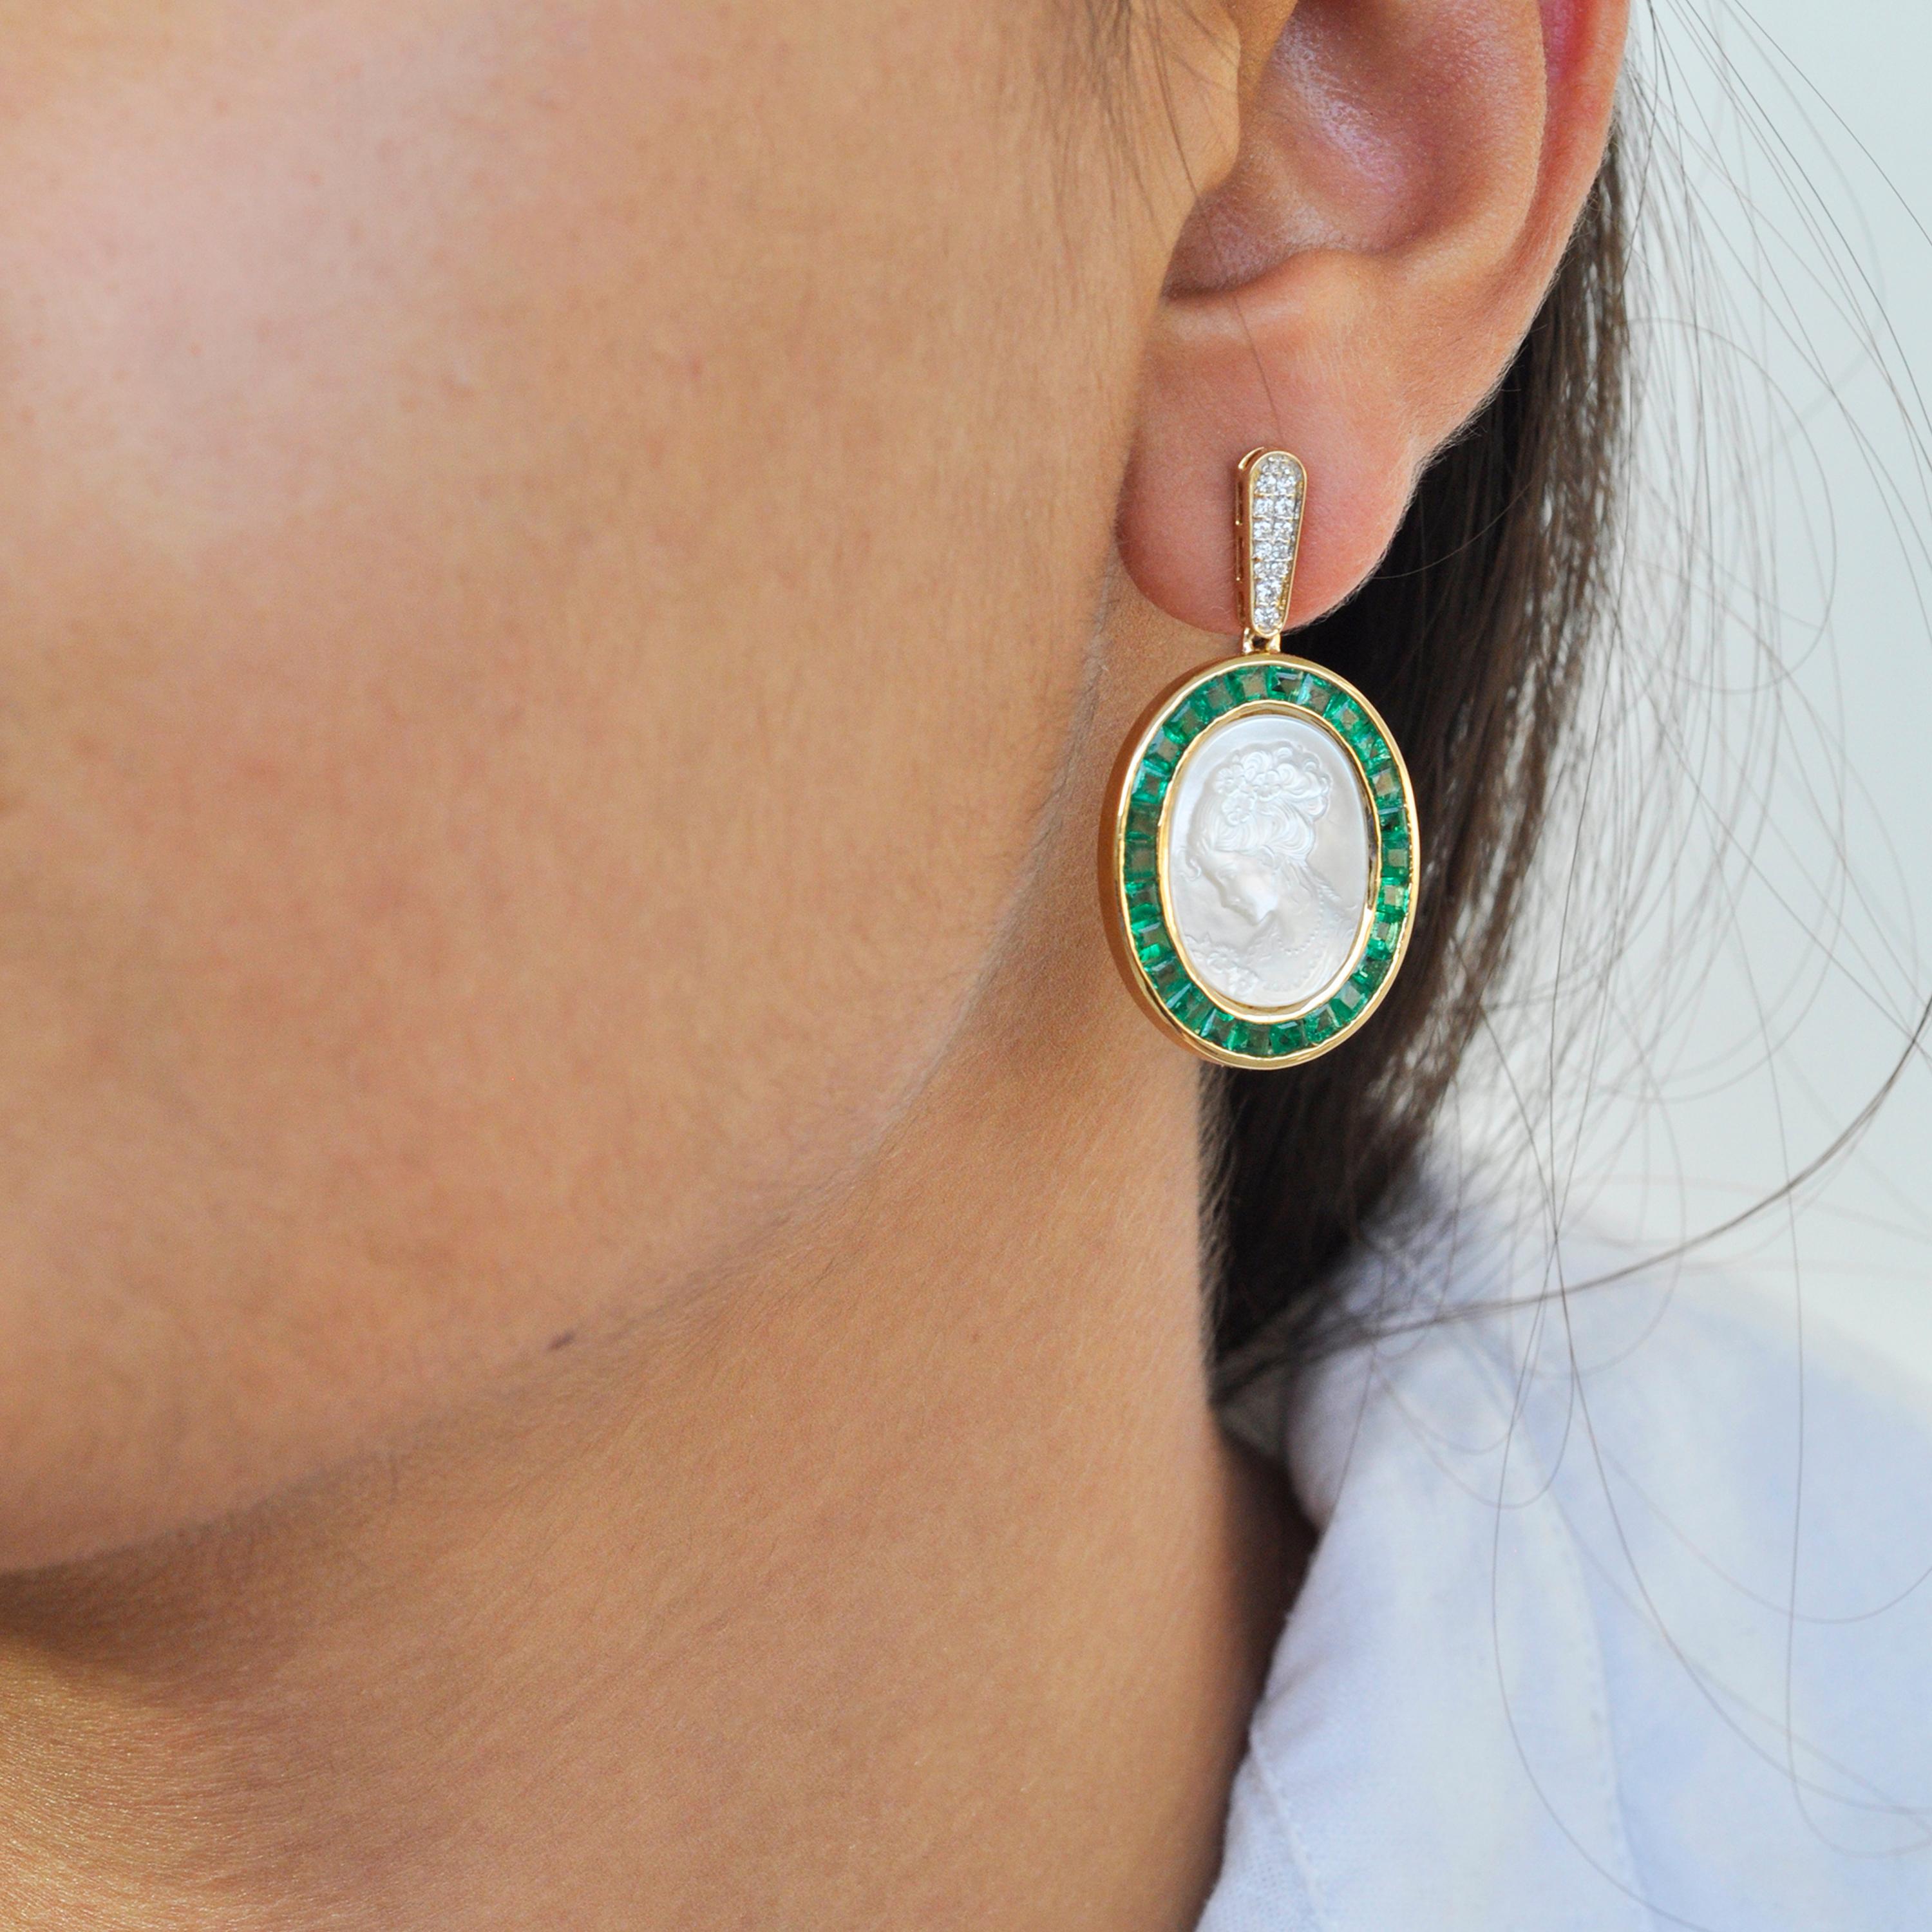 18 karat yellow gold calibre cut emerald pearl carving diamond dangler earrings.

This extraordinary gleaming green emerald mother of pearl Cameo dangling earrings is very princely. The center exquisite special cameo portrait on the relief of a